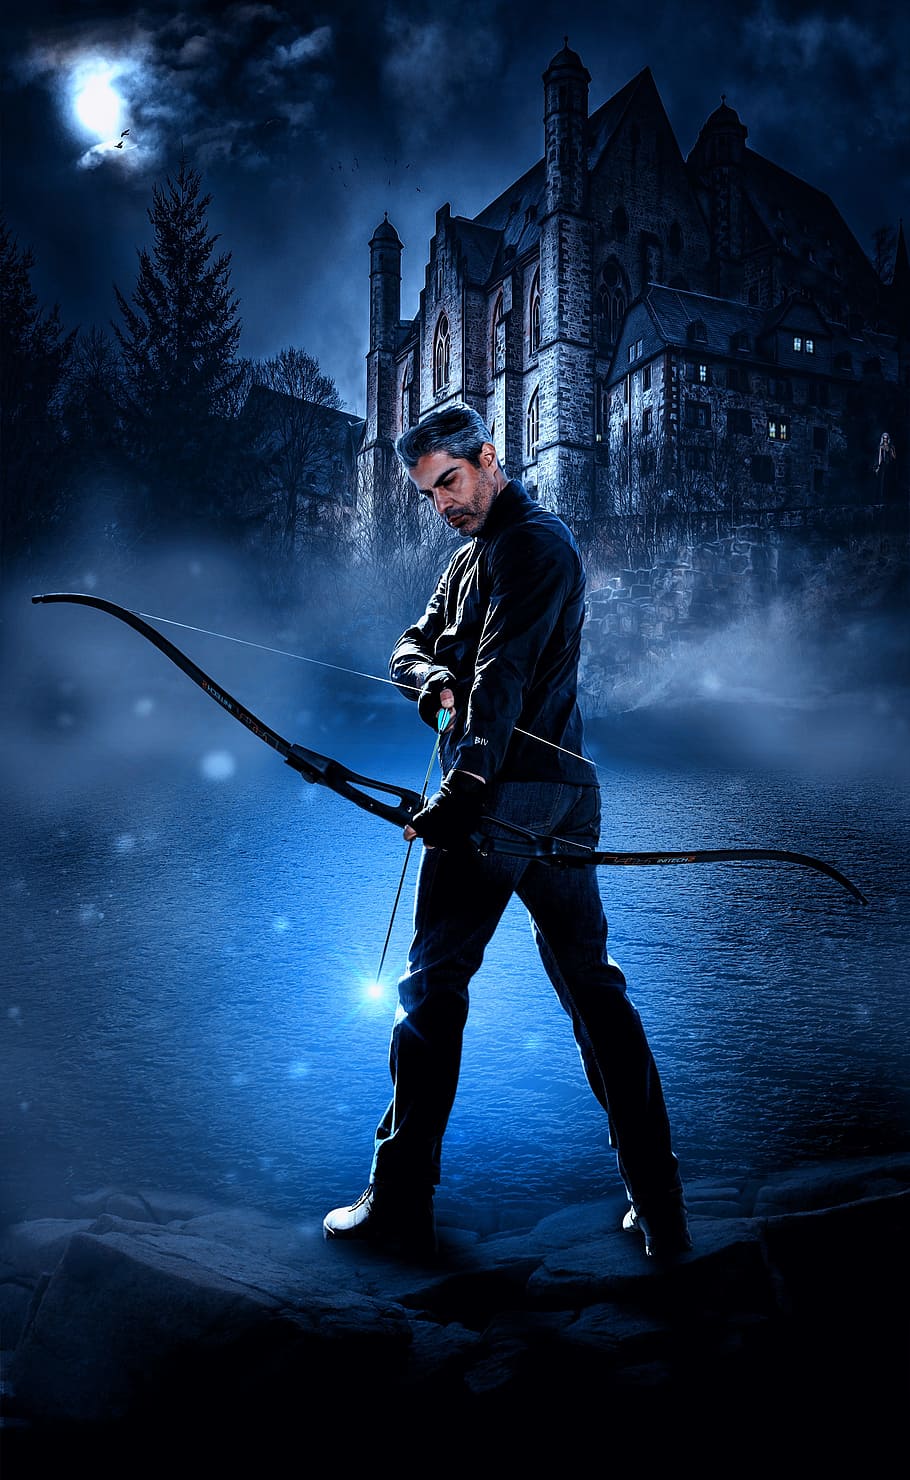 person holding composite bow, arrow, man, hunt, moon, weapon